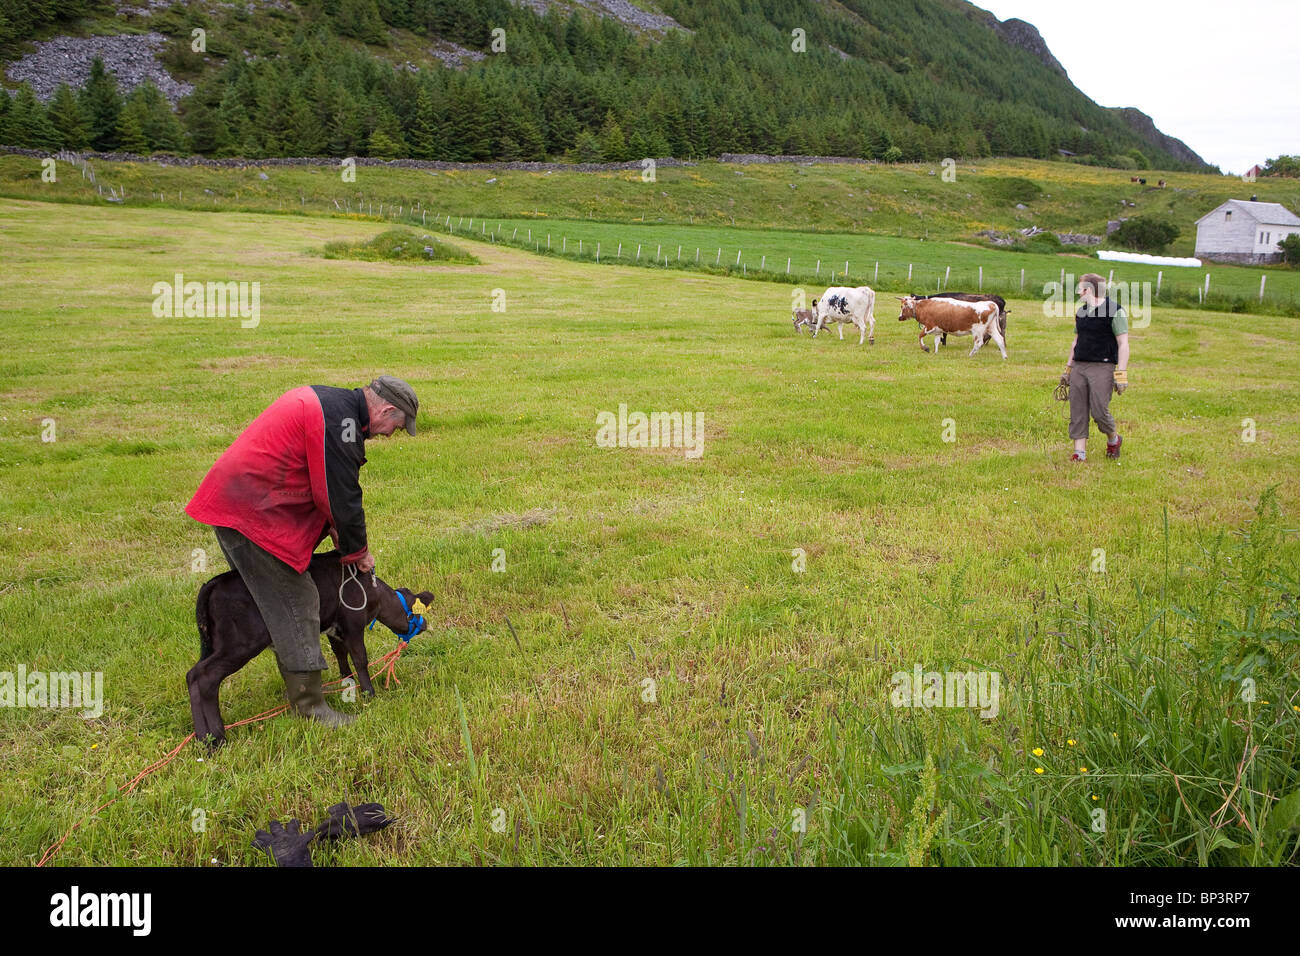 A 10 days old calf is ready to be released into the green grassy fields on the island Runde on the west coast of Norway. Stock Photo